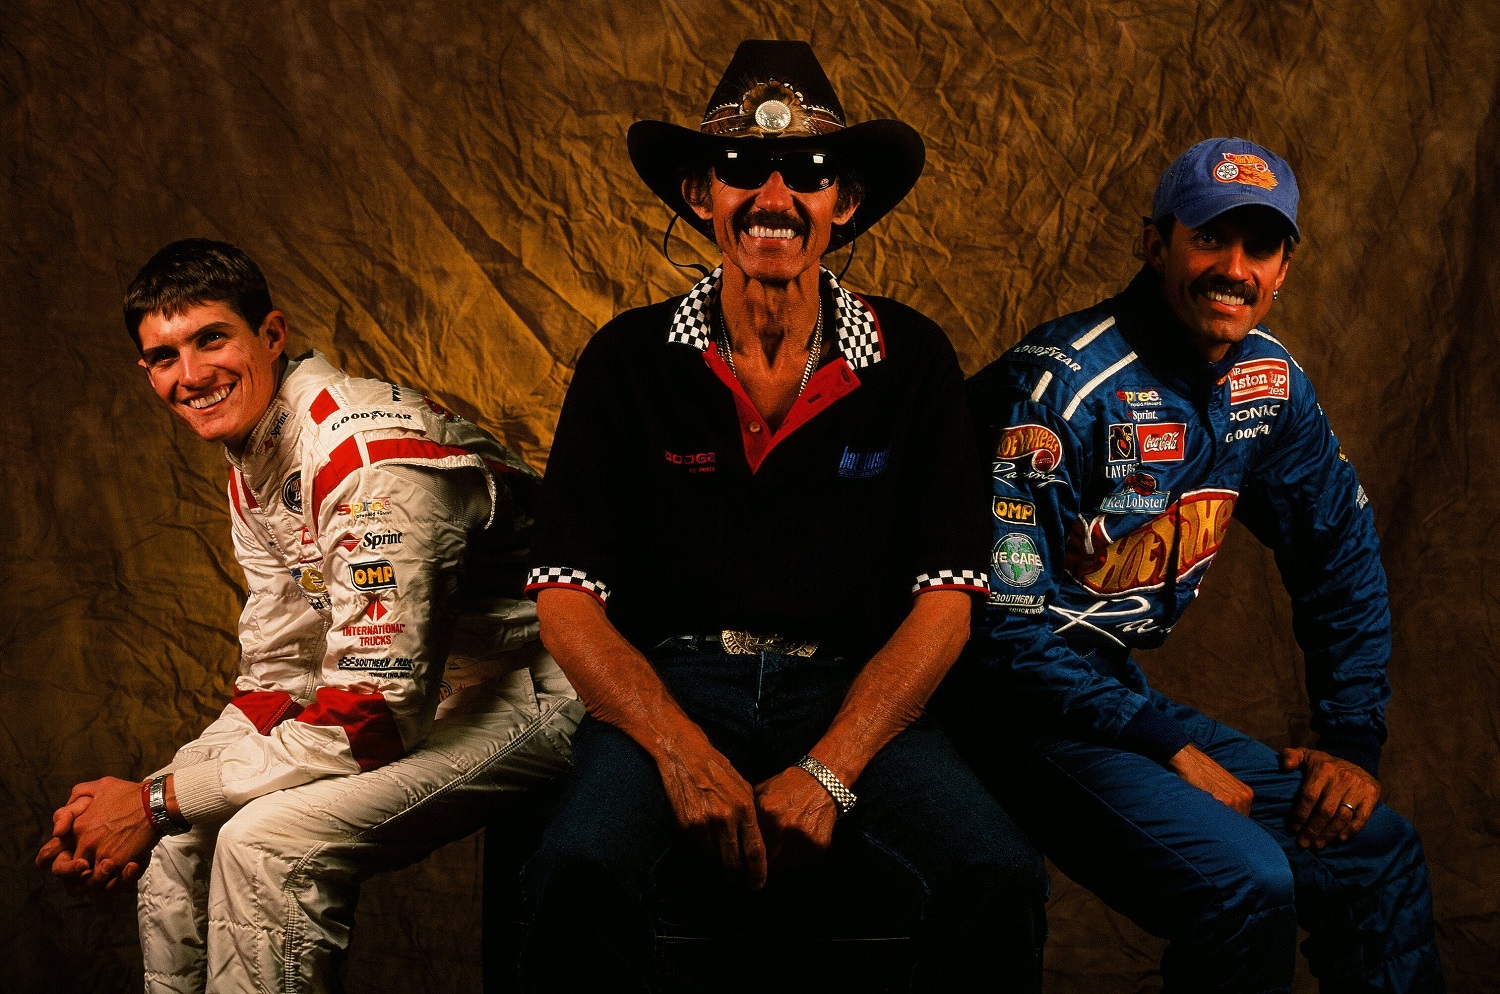 Richard Petty, Kyle Petty and Adam Petty pose for a photo on Sept. 13, 1999.